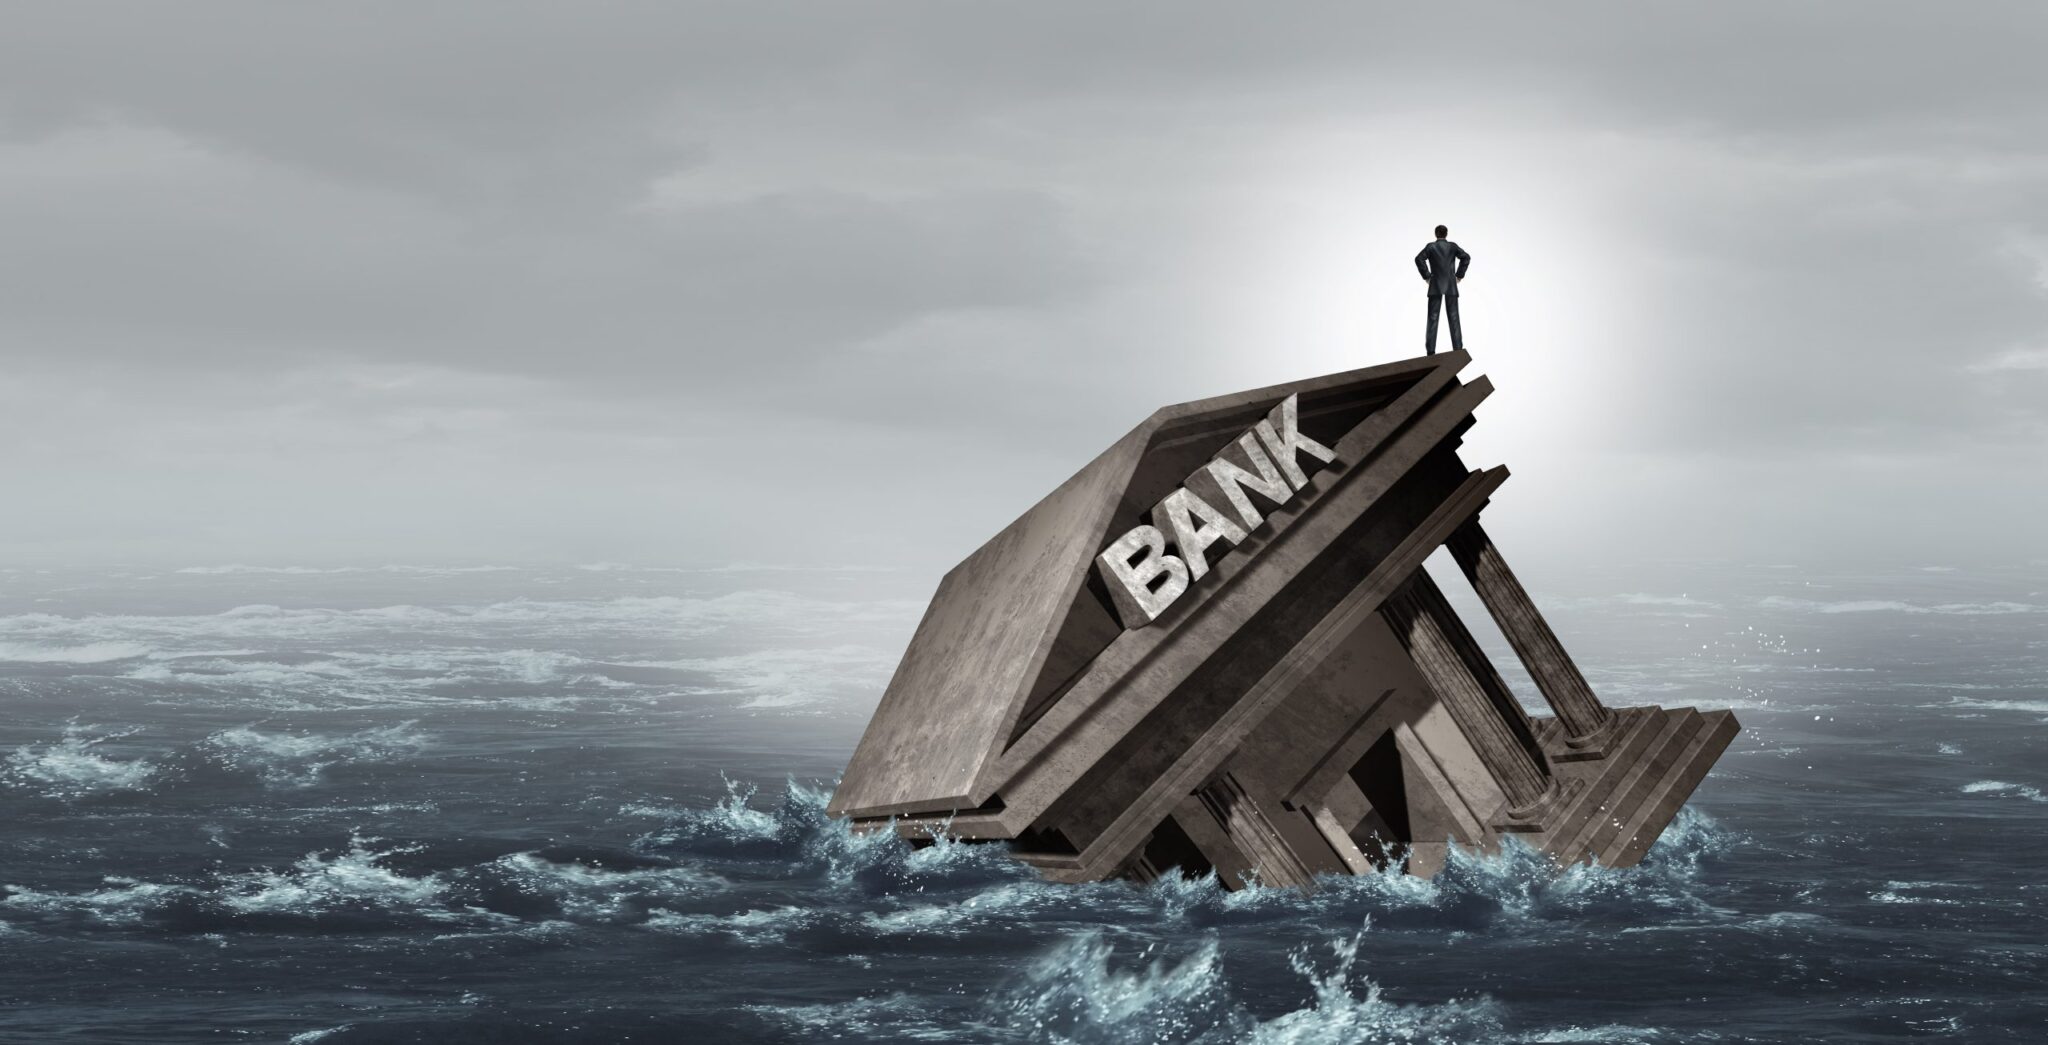 Bank Smarter: How CFOs Can Protect Assets, Reduce Banking Fees, And Enhance Yield